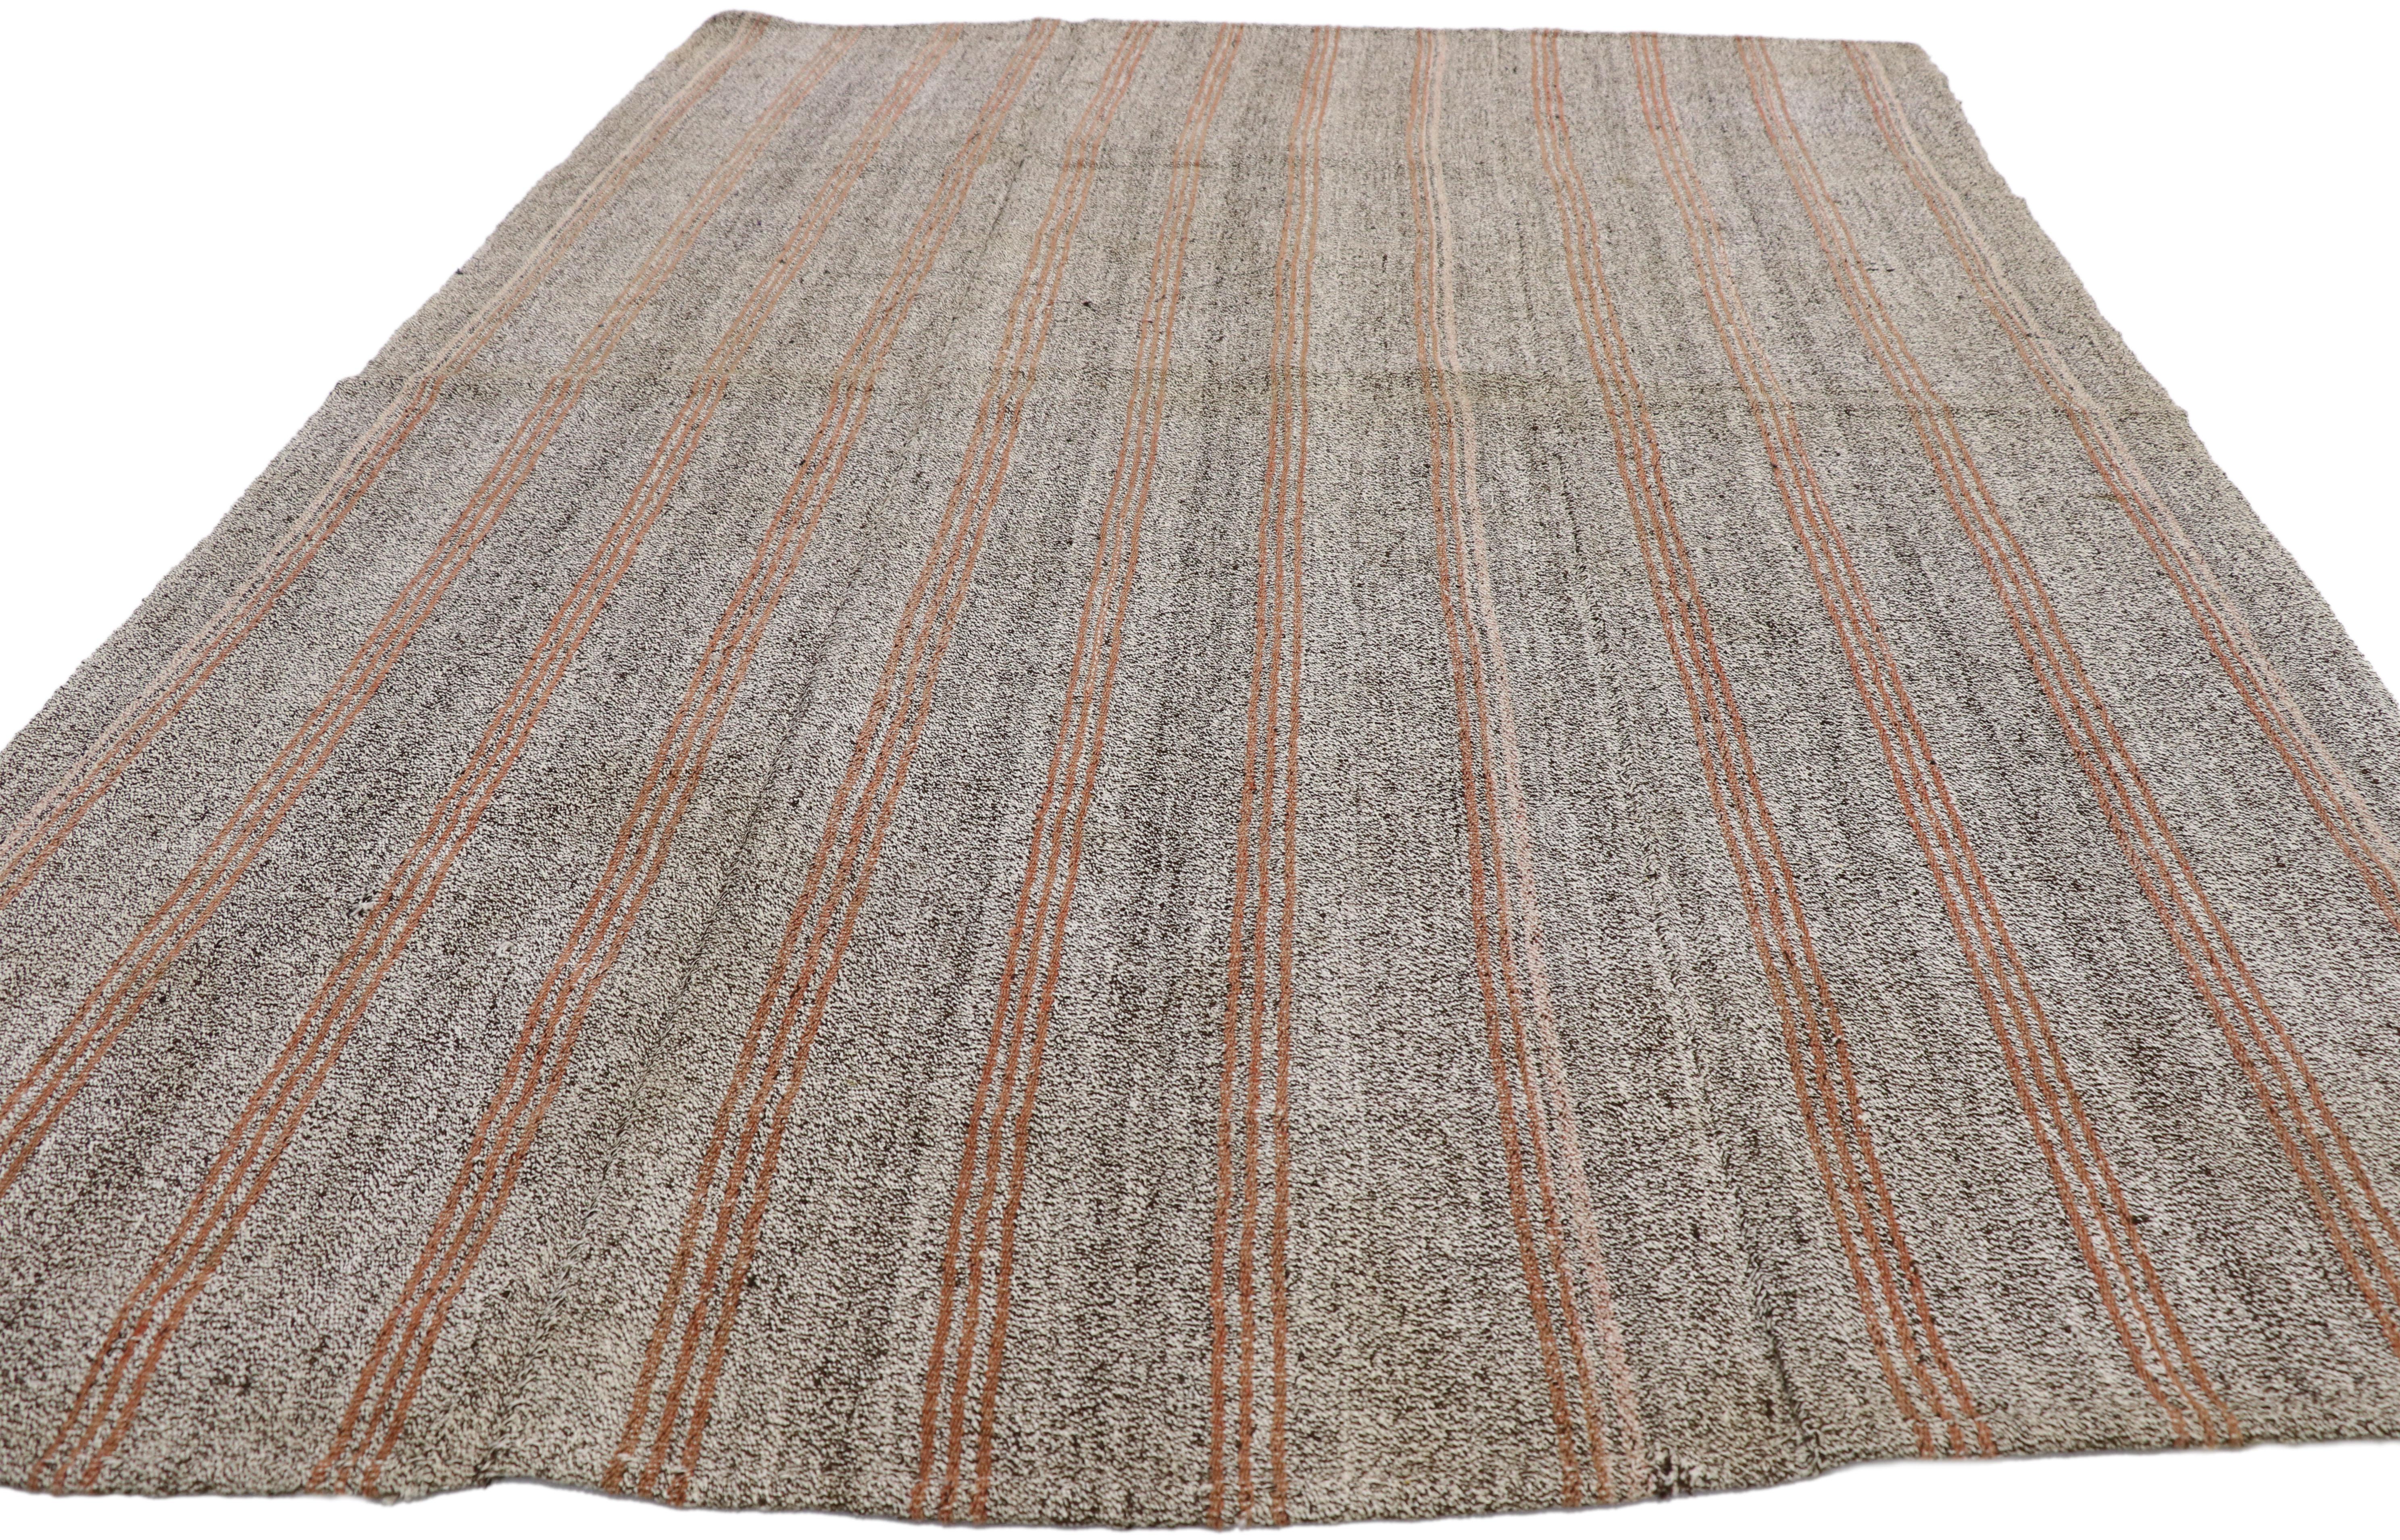 Hand-Woven Vintage Turkish Kilim with Rustic Industrial Style, Striped Kilim Rug